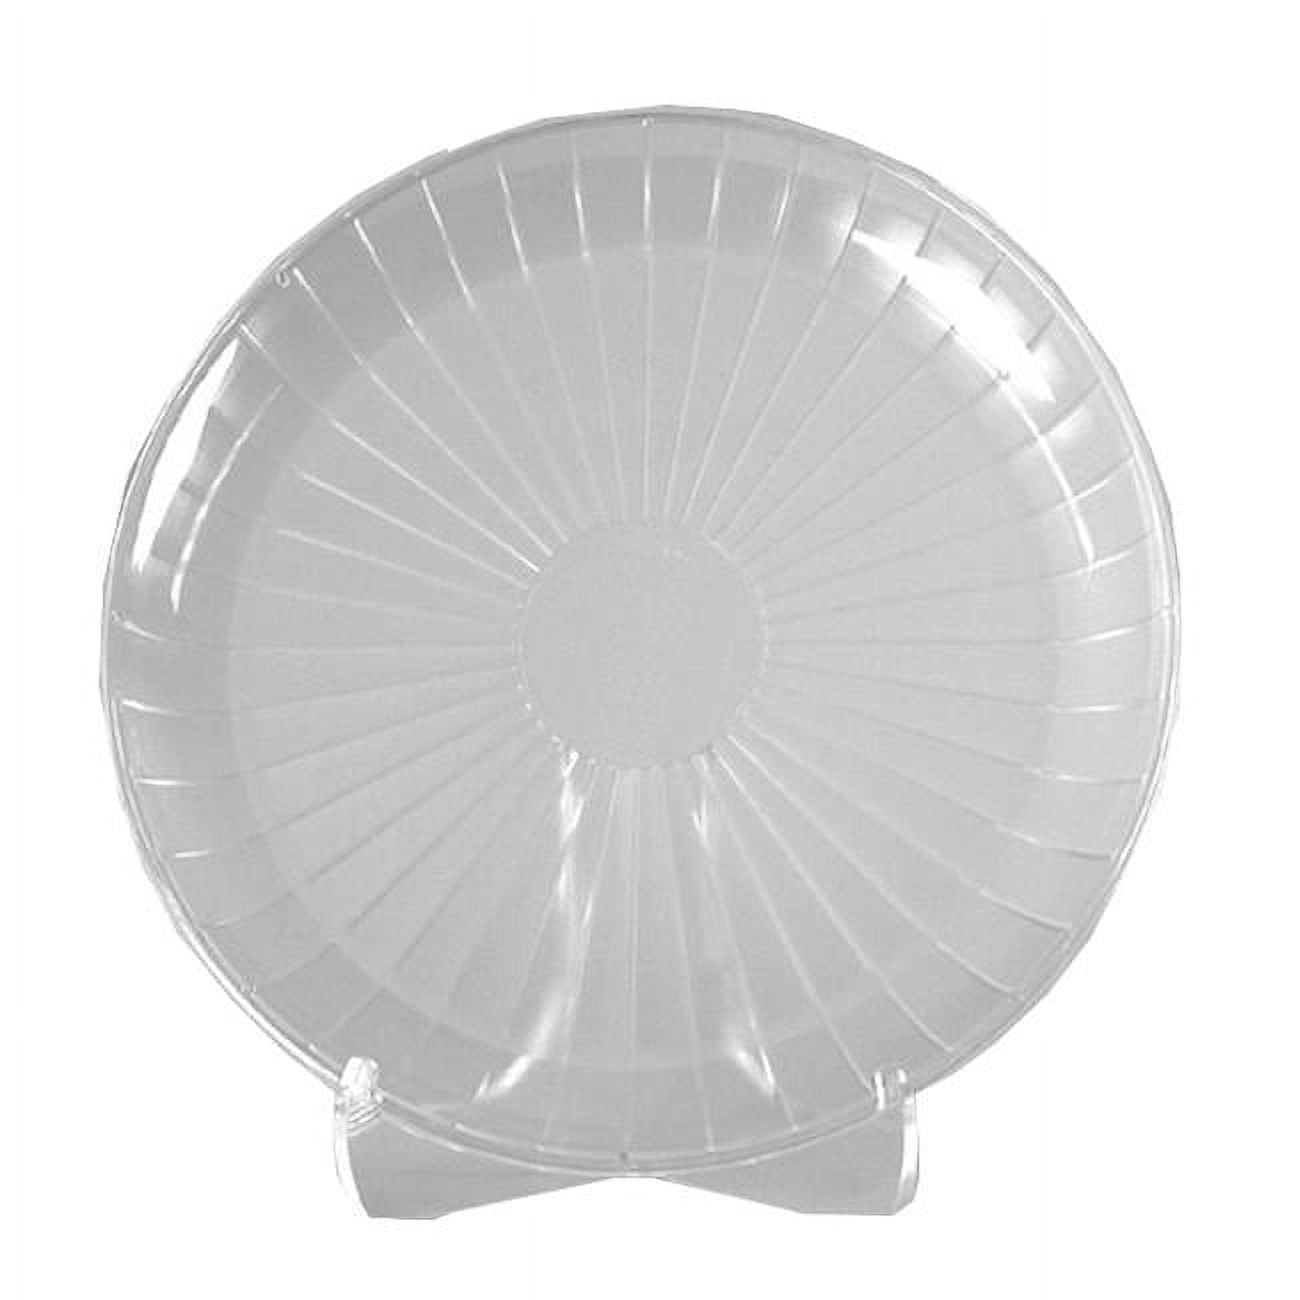 Picture of WNA Comet West A712PCL25 PEC 12 in. Round Catering Tray, Clear